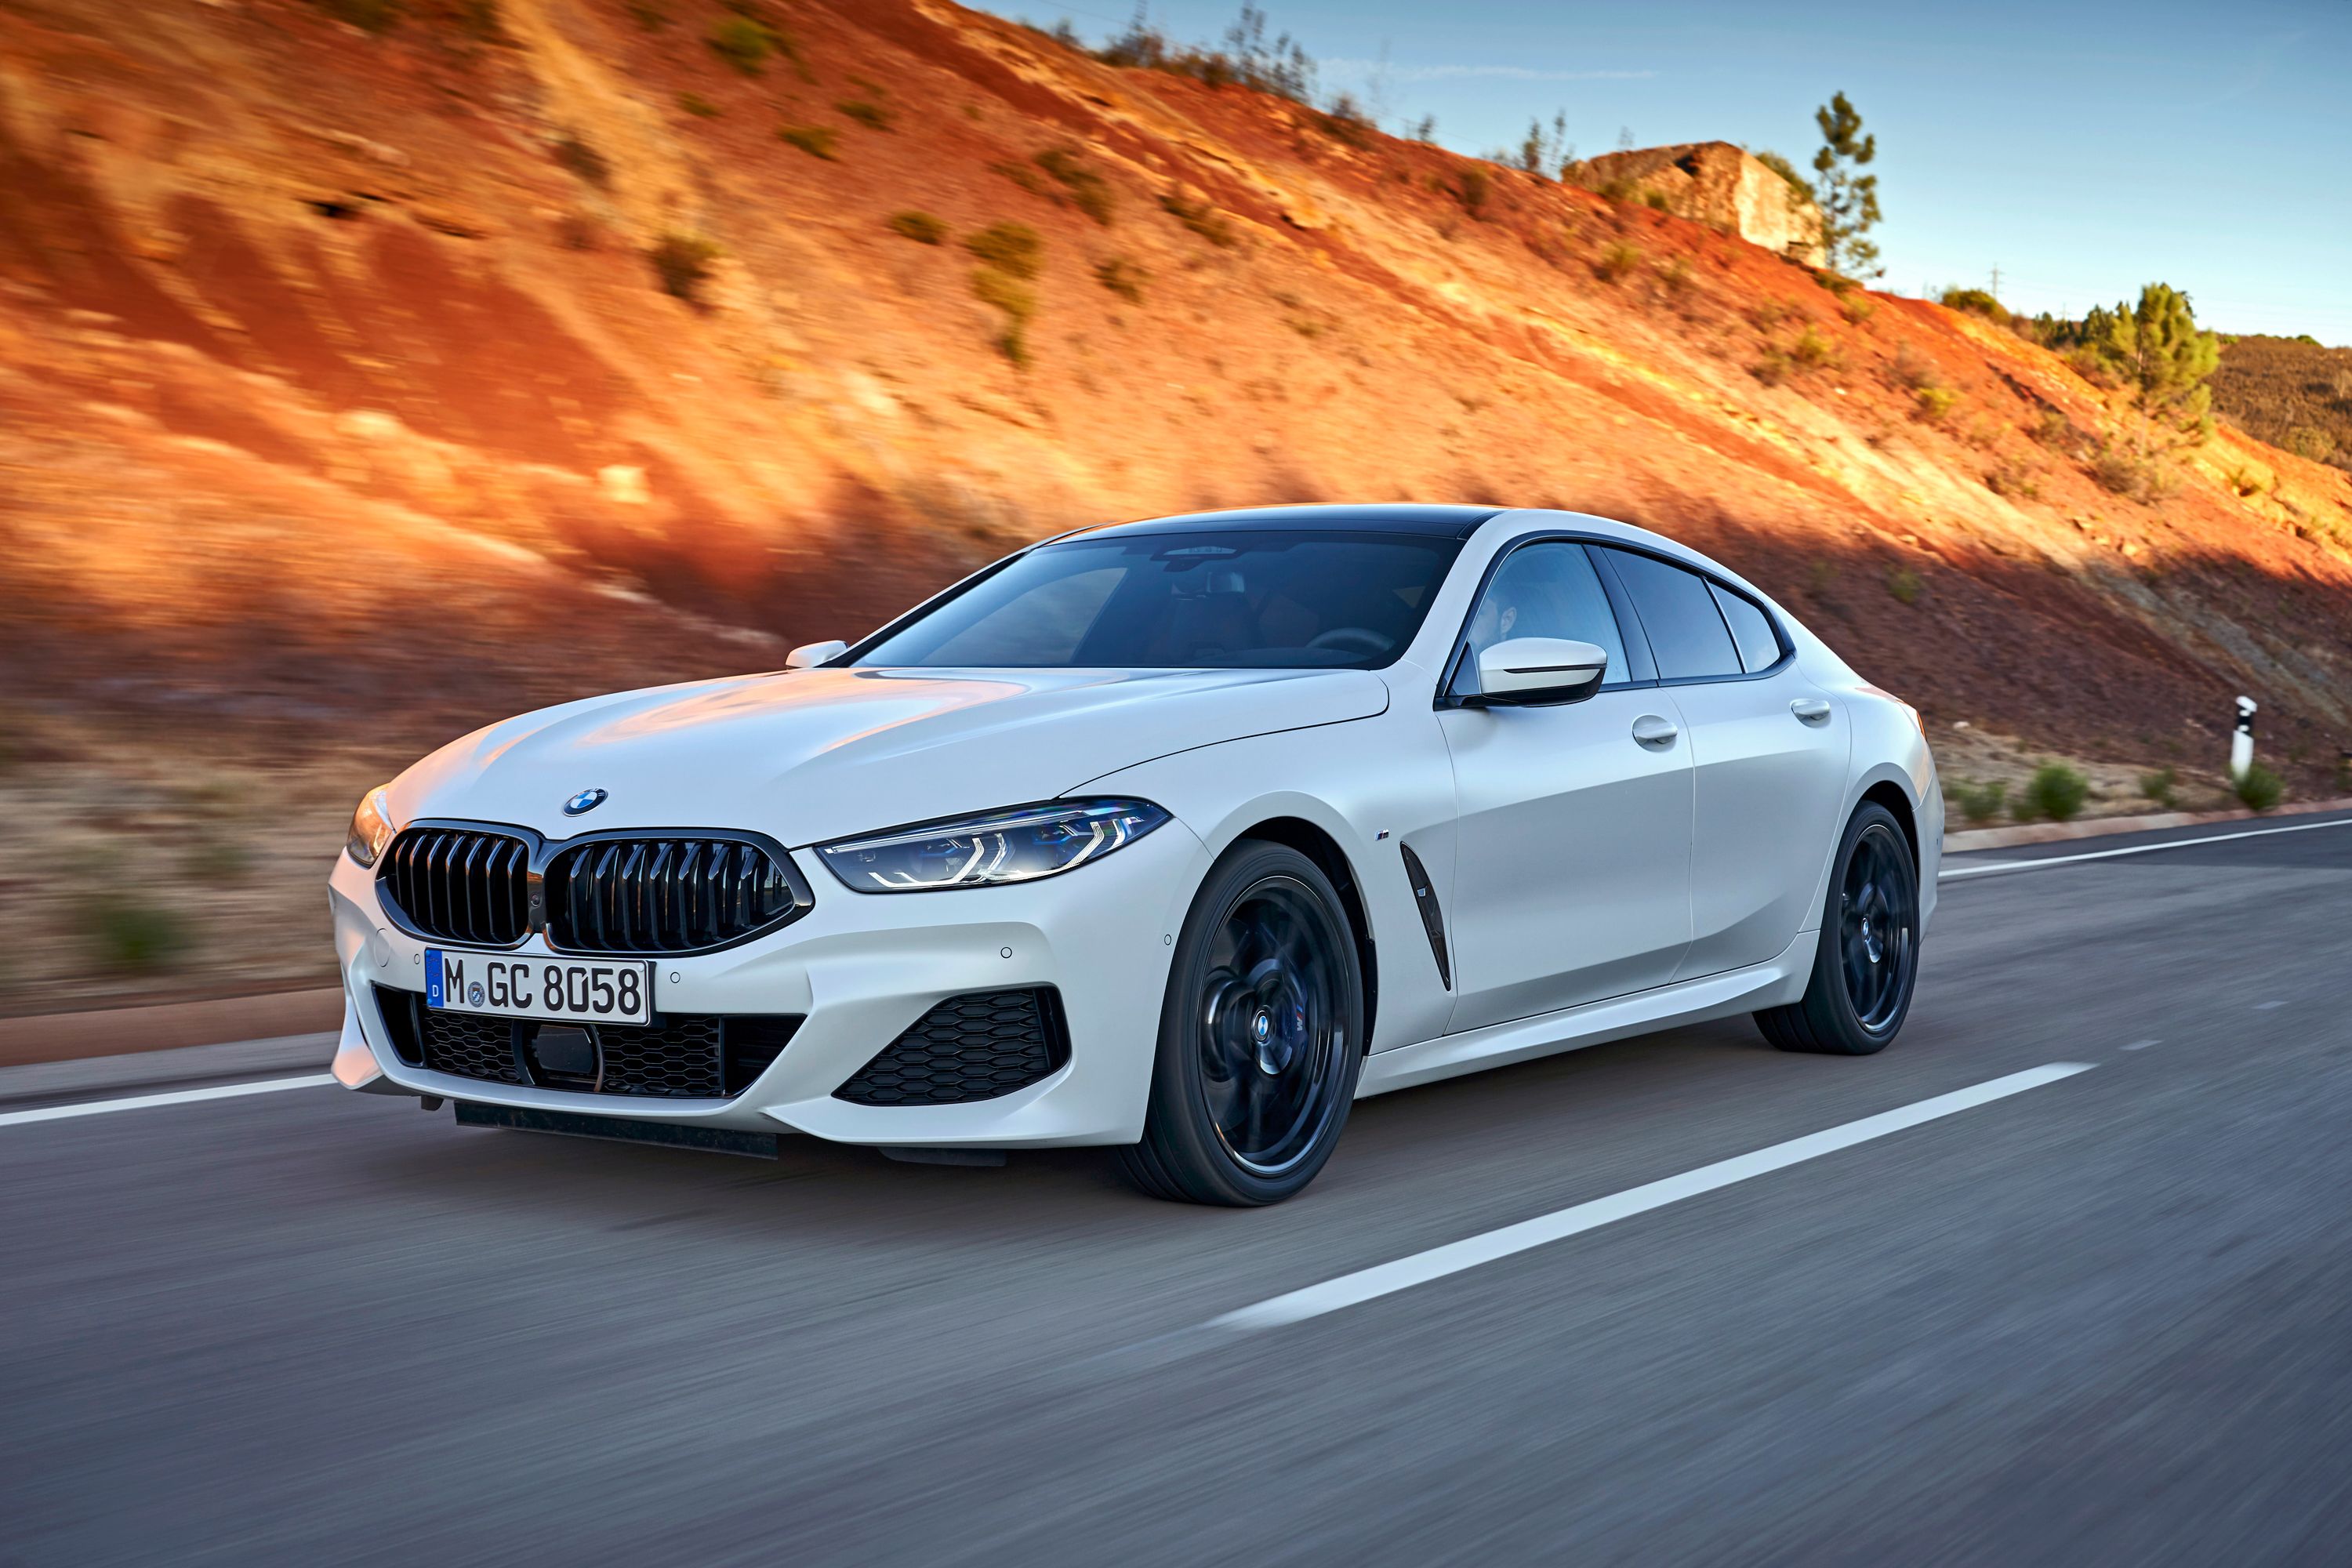 F30 BMW 330d M Sport review (2012-2019) - price, specs and 0-60 time